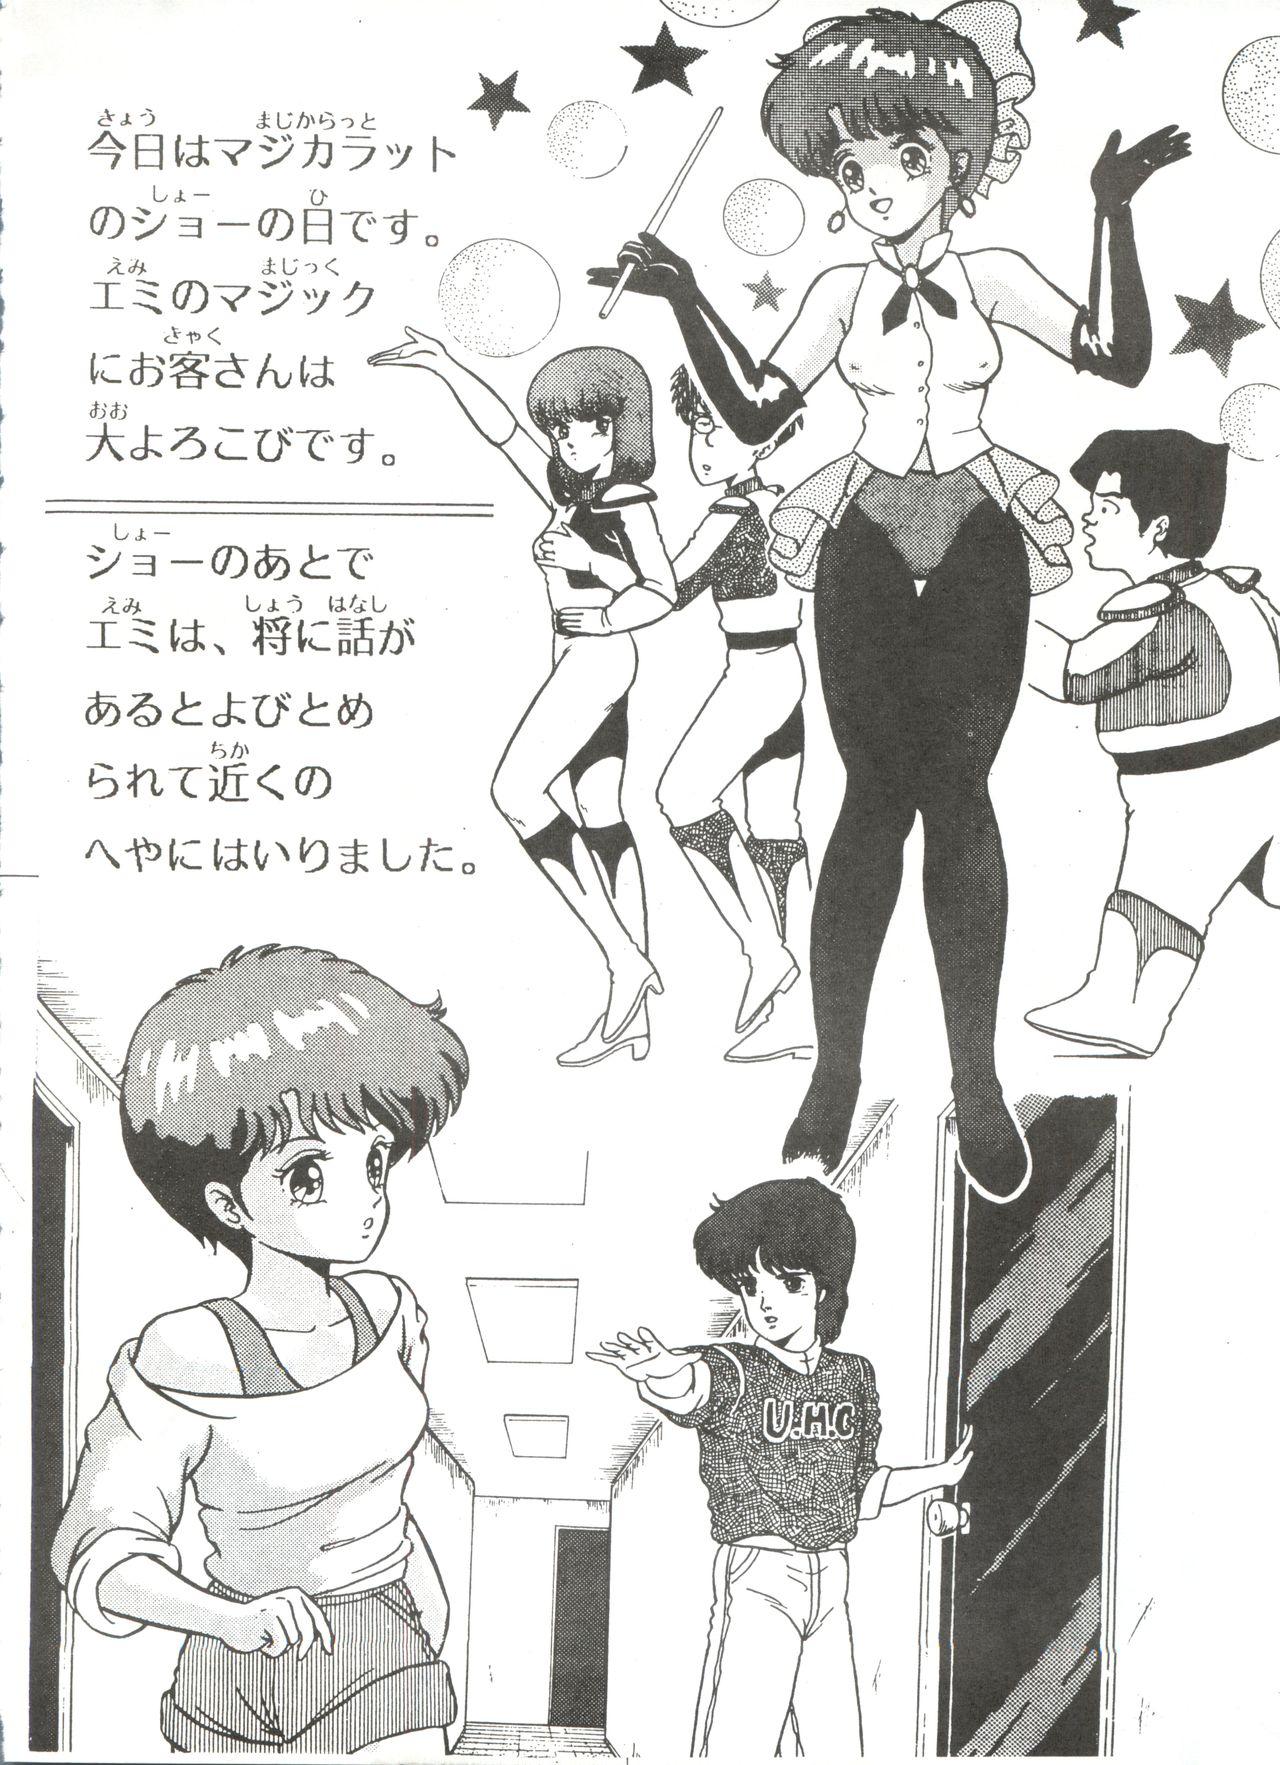 Best Look Out 3R - Maison ikkoku Magical emi Gundam zz The super dimension fortress macross Gay Physicalexamination - Page 6